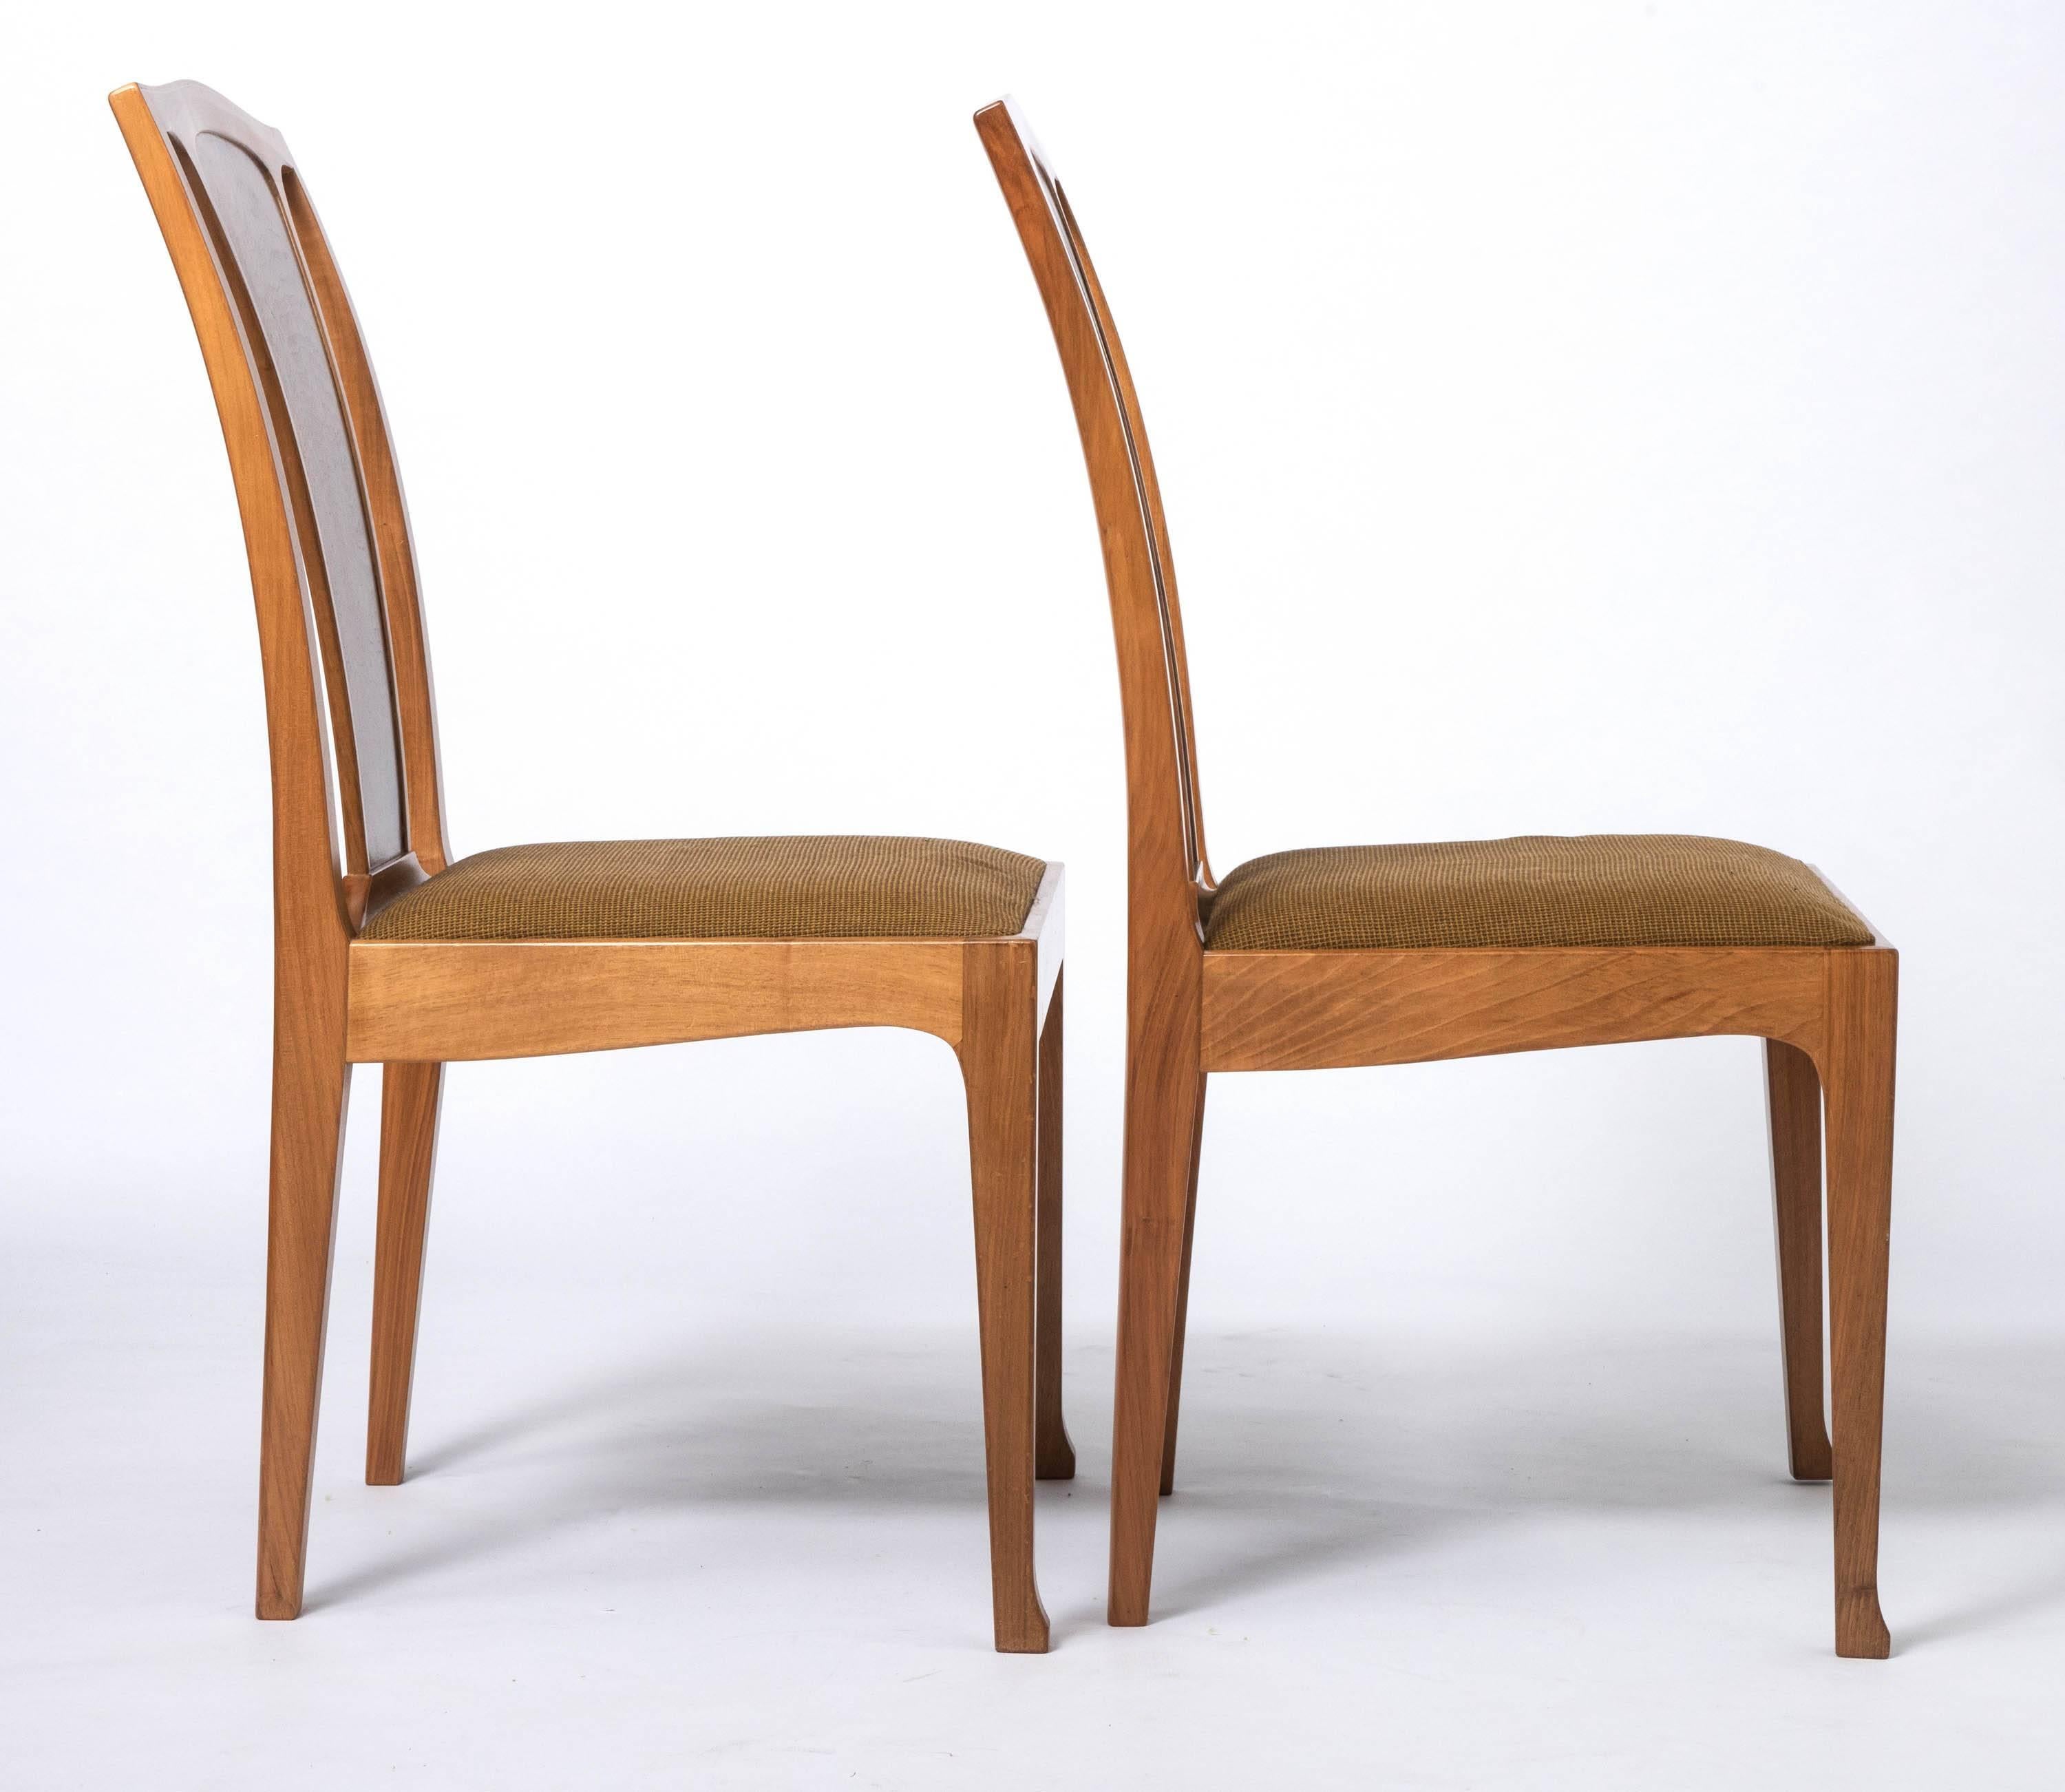 Pair of English Walnut Chairs by Edward Barnsley, England, circa 1969 In Excellent Condition For Sale In Macclesfield, Cheshire